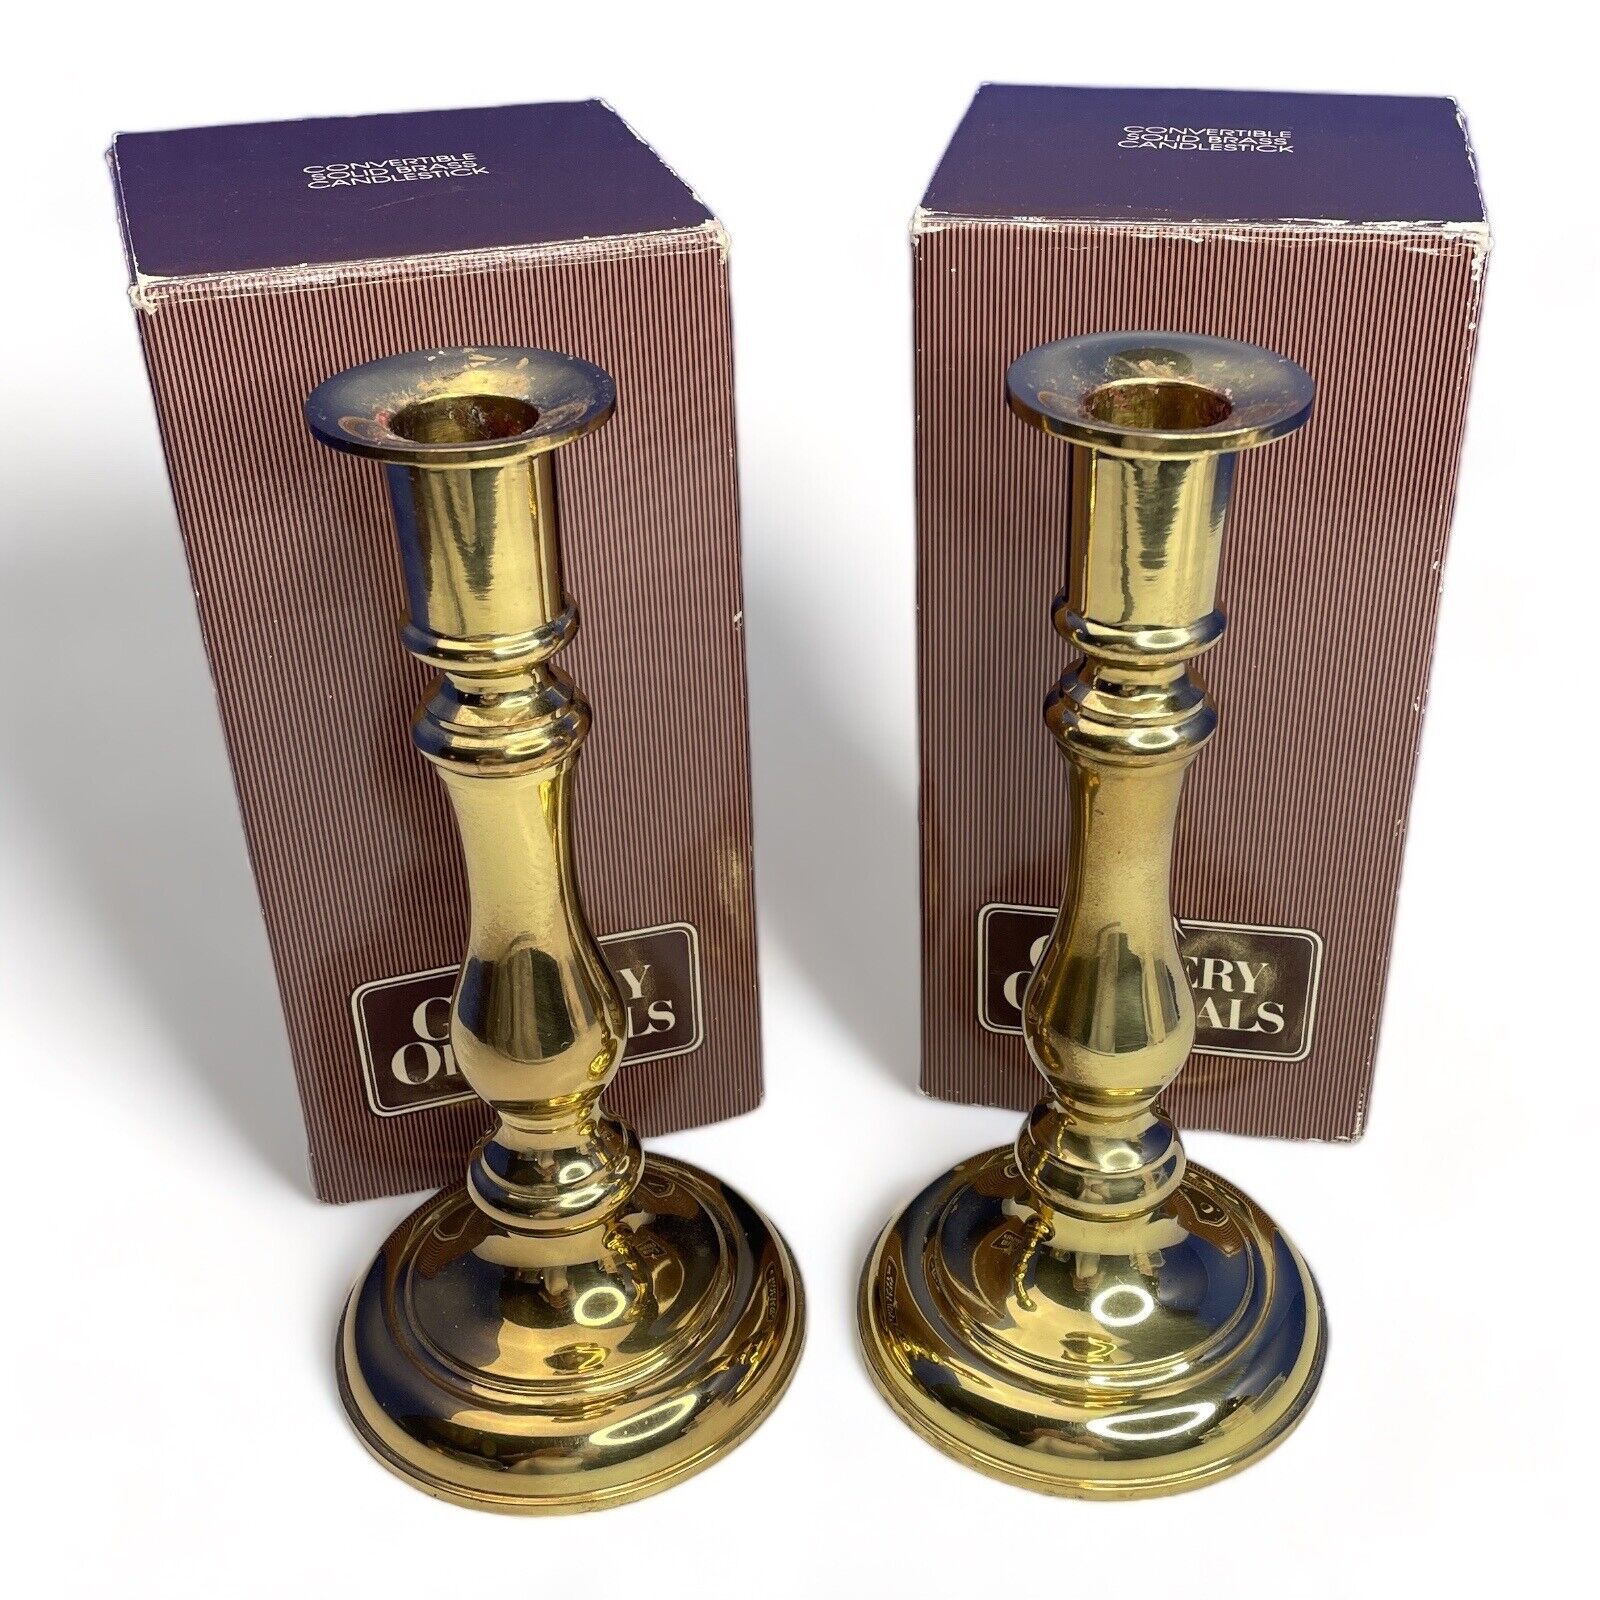 Lot of 2 Convertible Solid Brass Candlestick Holders Gallery Original Avon Boxed